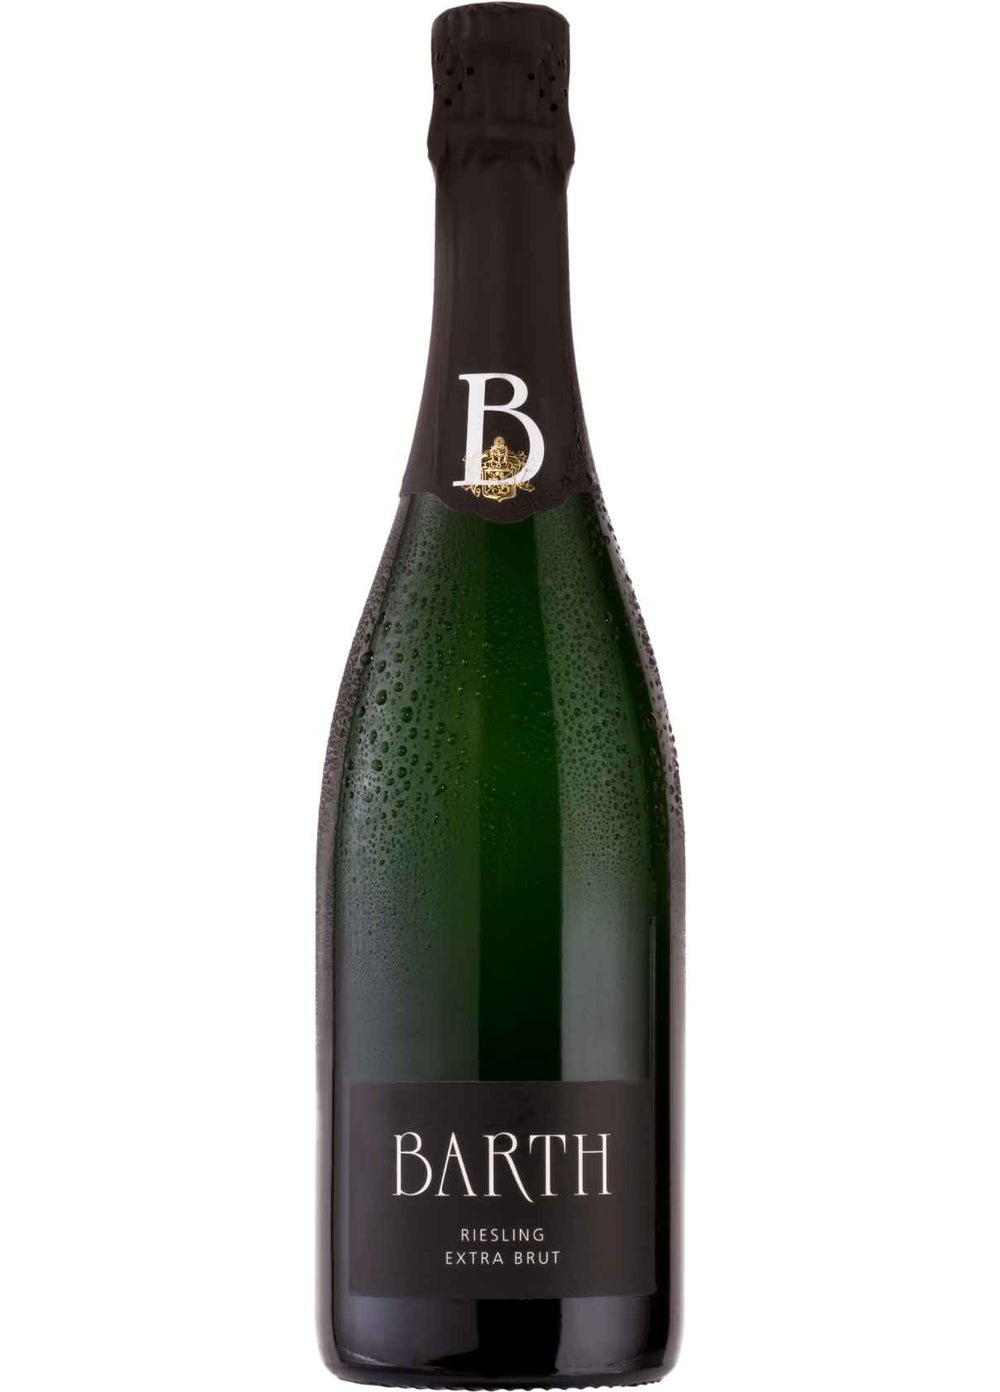 Barth - Riesling Extra Brut